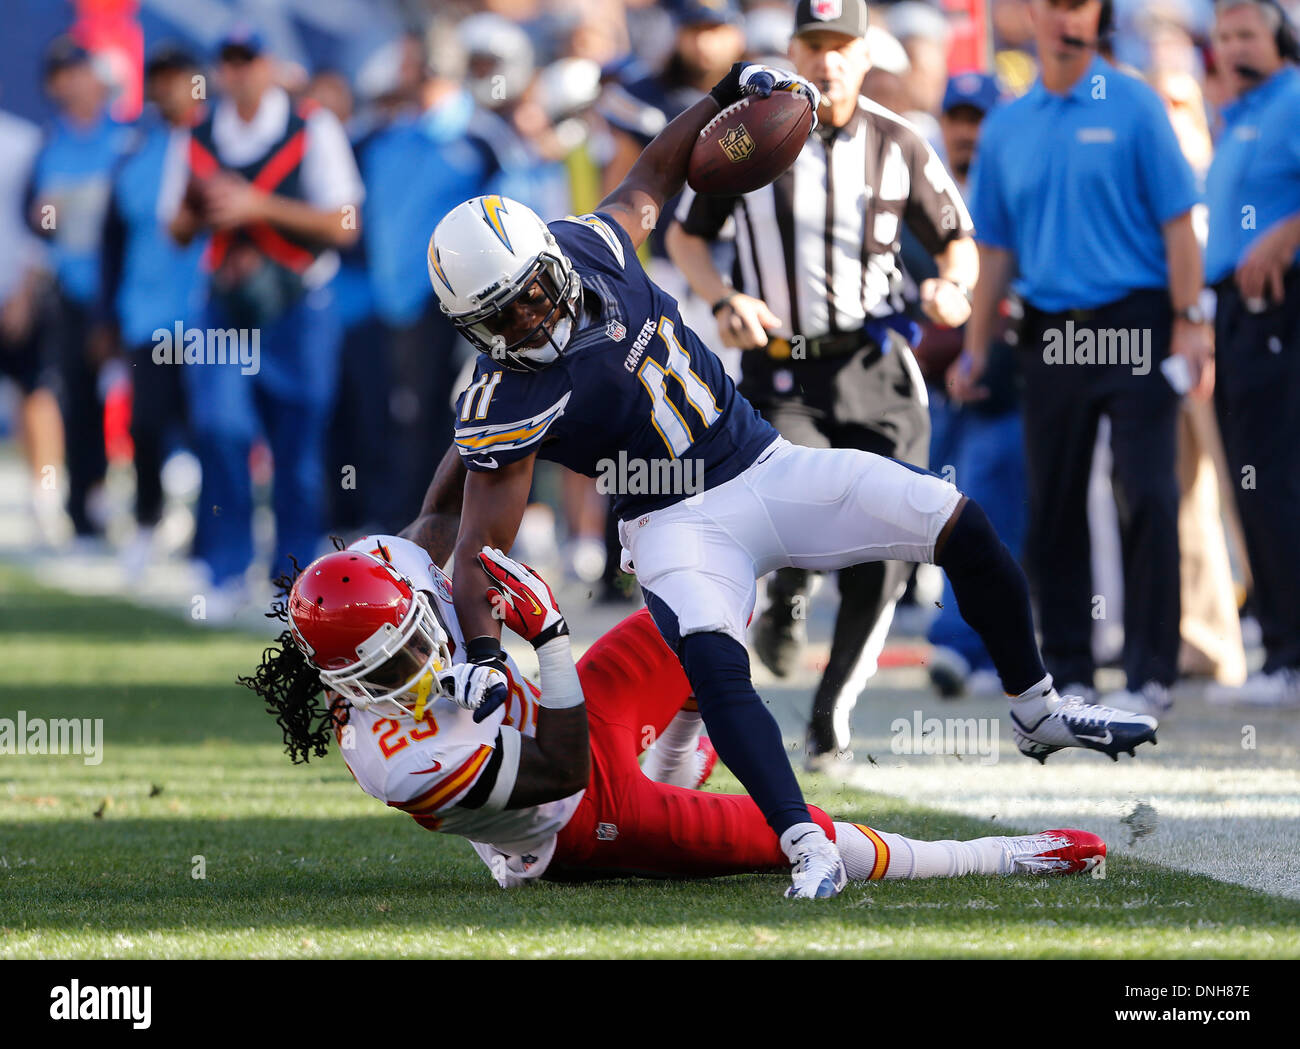 San Diego, California, USA. 29th Dec, 2013. Dec. 29, 2013 San Diego, California USA | Chargers receiver Eddie Royal gets taken down by Chiefs safety Kendrick Lewis after his 30 yard catch and run as the Chargers took on the Kansas City Chiefs at Qualcomm Stadium Sunday afternoon. | Mandatory Photo Credit: Photo by Earnie Grafton/UT San Diego/Copyright 2013 San Diego Union-Tribune, LLC Credit:  U-T San Diego/ZUMAPRESS.com/Alamy Live News Stock Photo